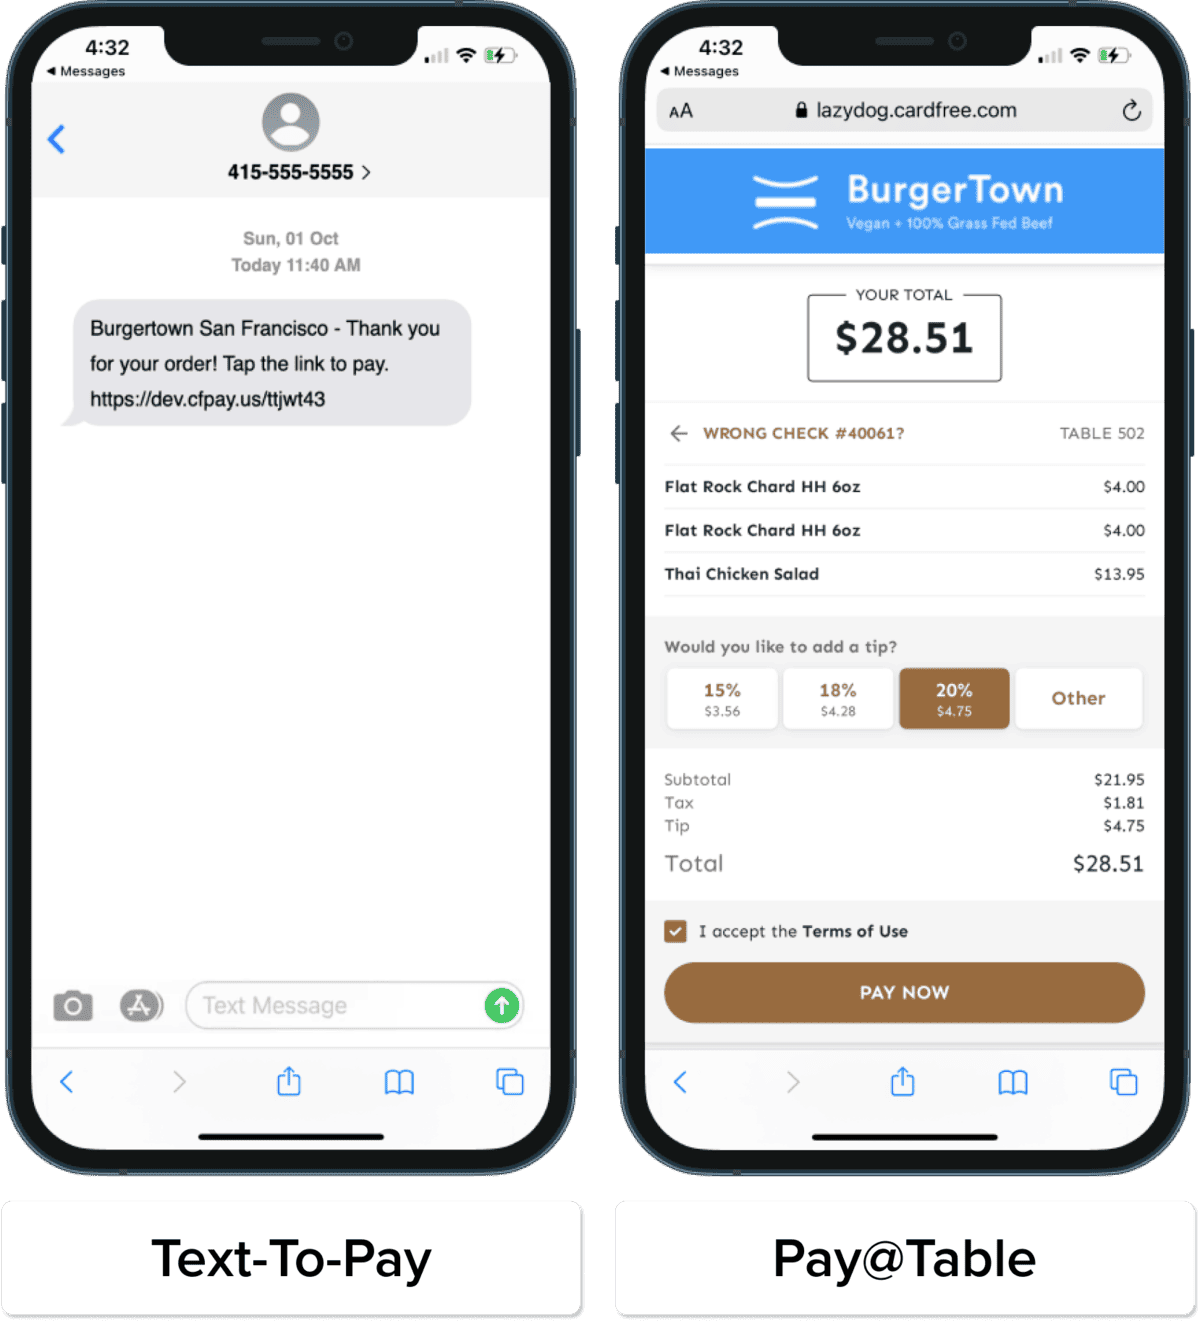 CardFree text-to-pay and pay at table